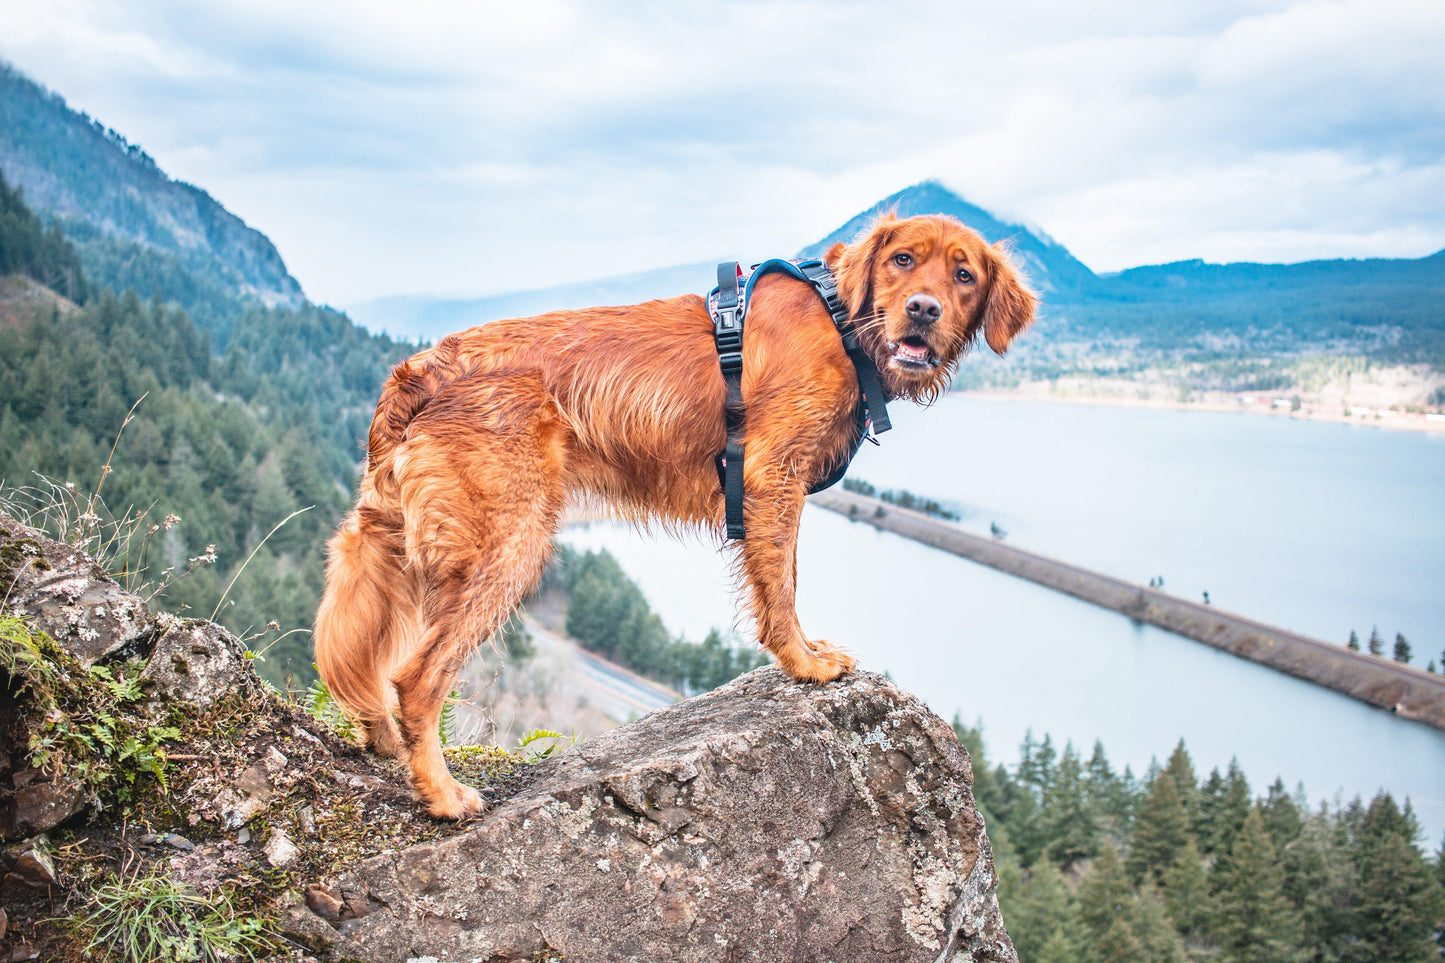 Wildside Dog Gear, Hiking dogs, dog friendly hikes, dog harness goldendoodle dog harness step in dog harness instagram dog harness xl dog harness no choke dog harness to help them walk dog harness reflective dog harness buckle dog harness no neck pressure dog harness not over head dog harness with poop bag holder dog harness easy to put on